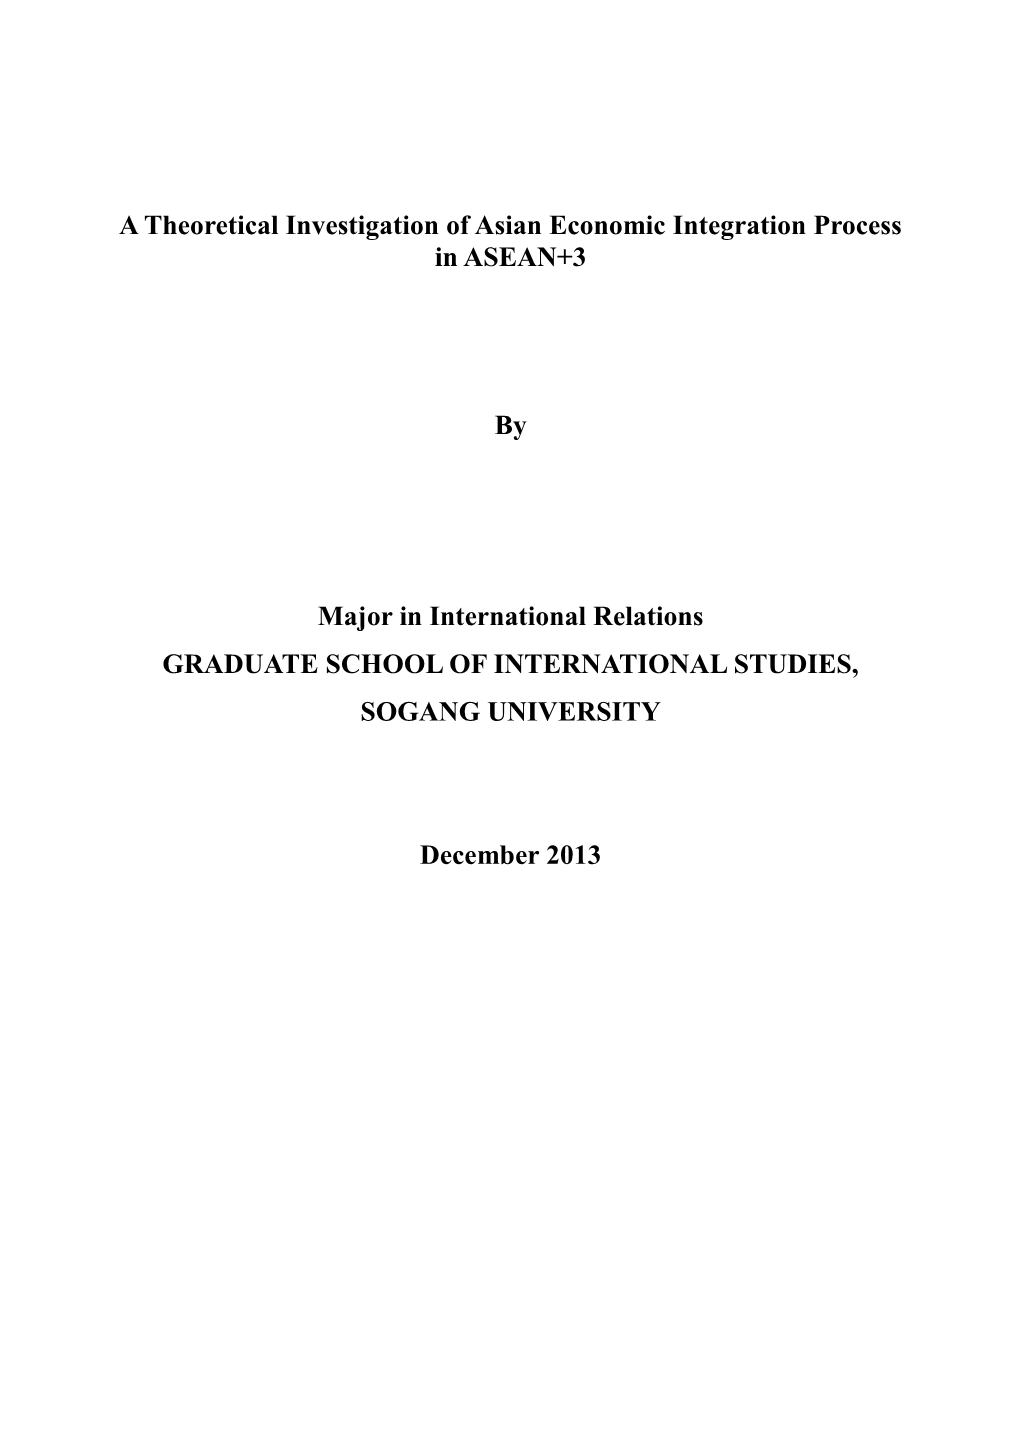 A Theoretical Investigation of Asian Economic Integration Process in ASEAN+3